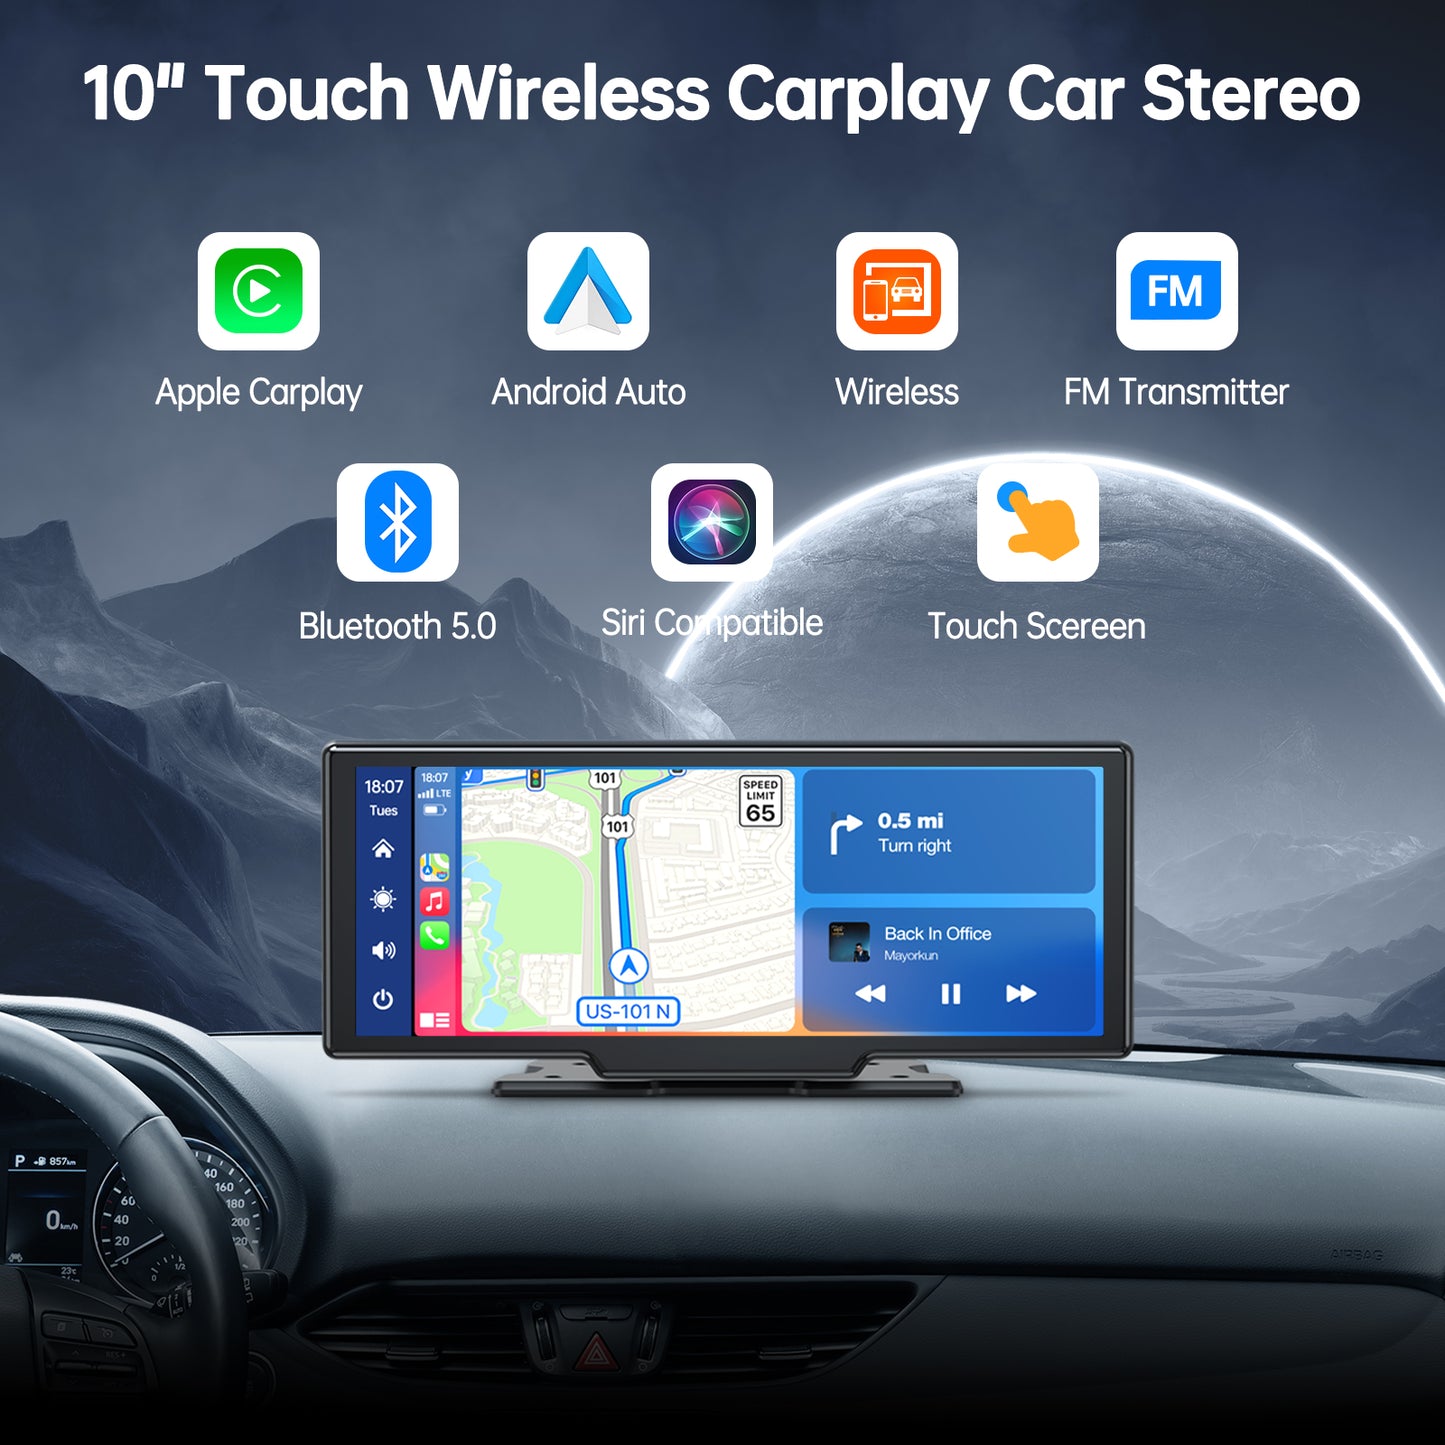 TOGUARD 10" Touchscreen Wireless Car Stereo Car Radio Receiver GPS Navigation Audio with Apple Carplay, Android Auto